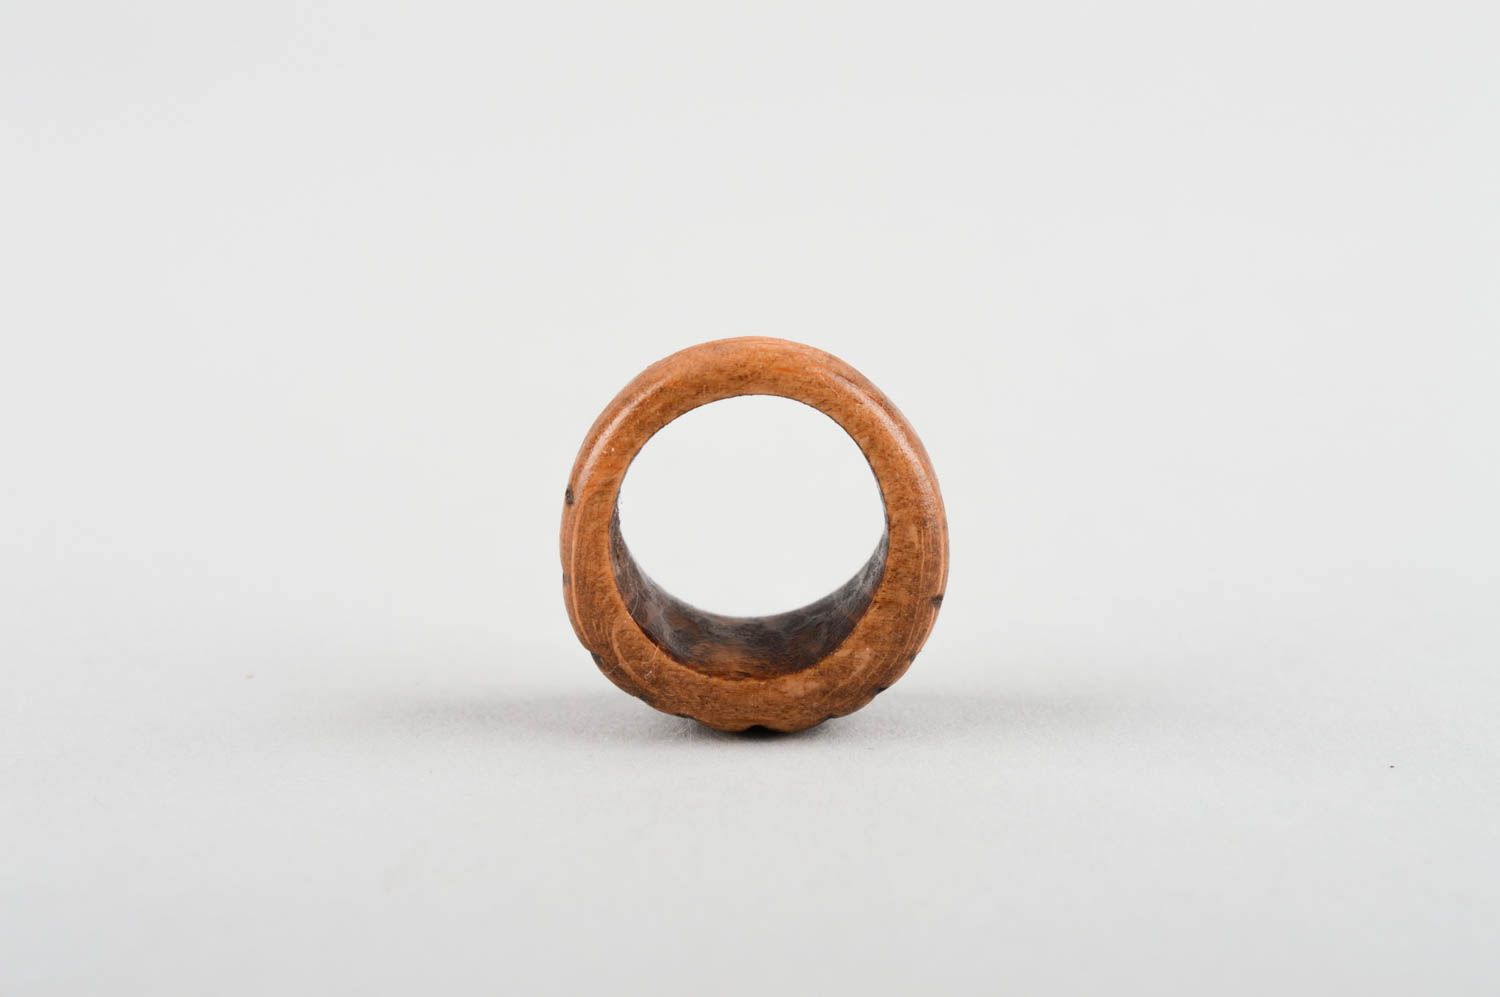 Stylish handmade wooden ring wooden jewelry designs accessories for girls photo 5